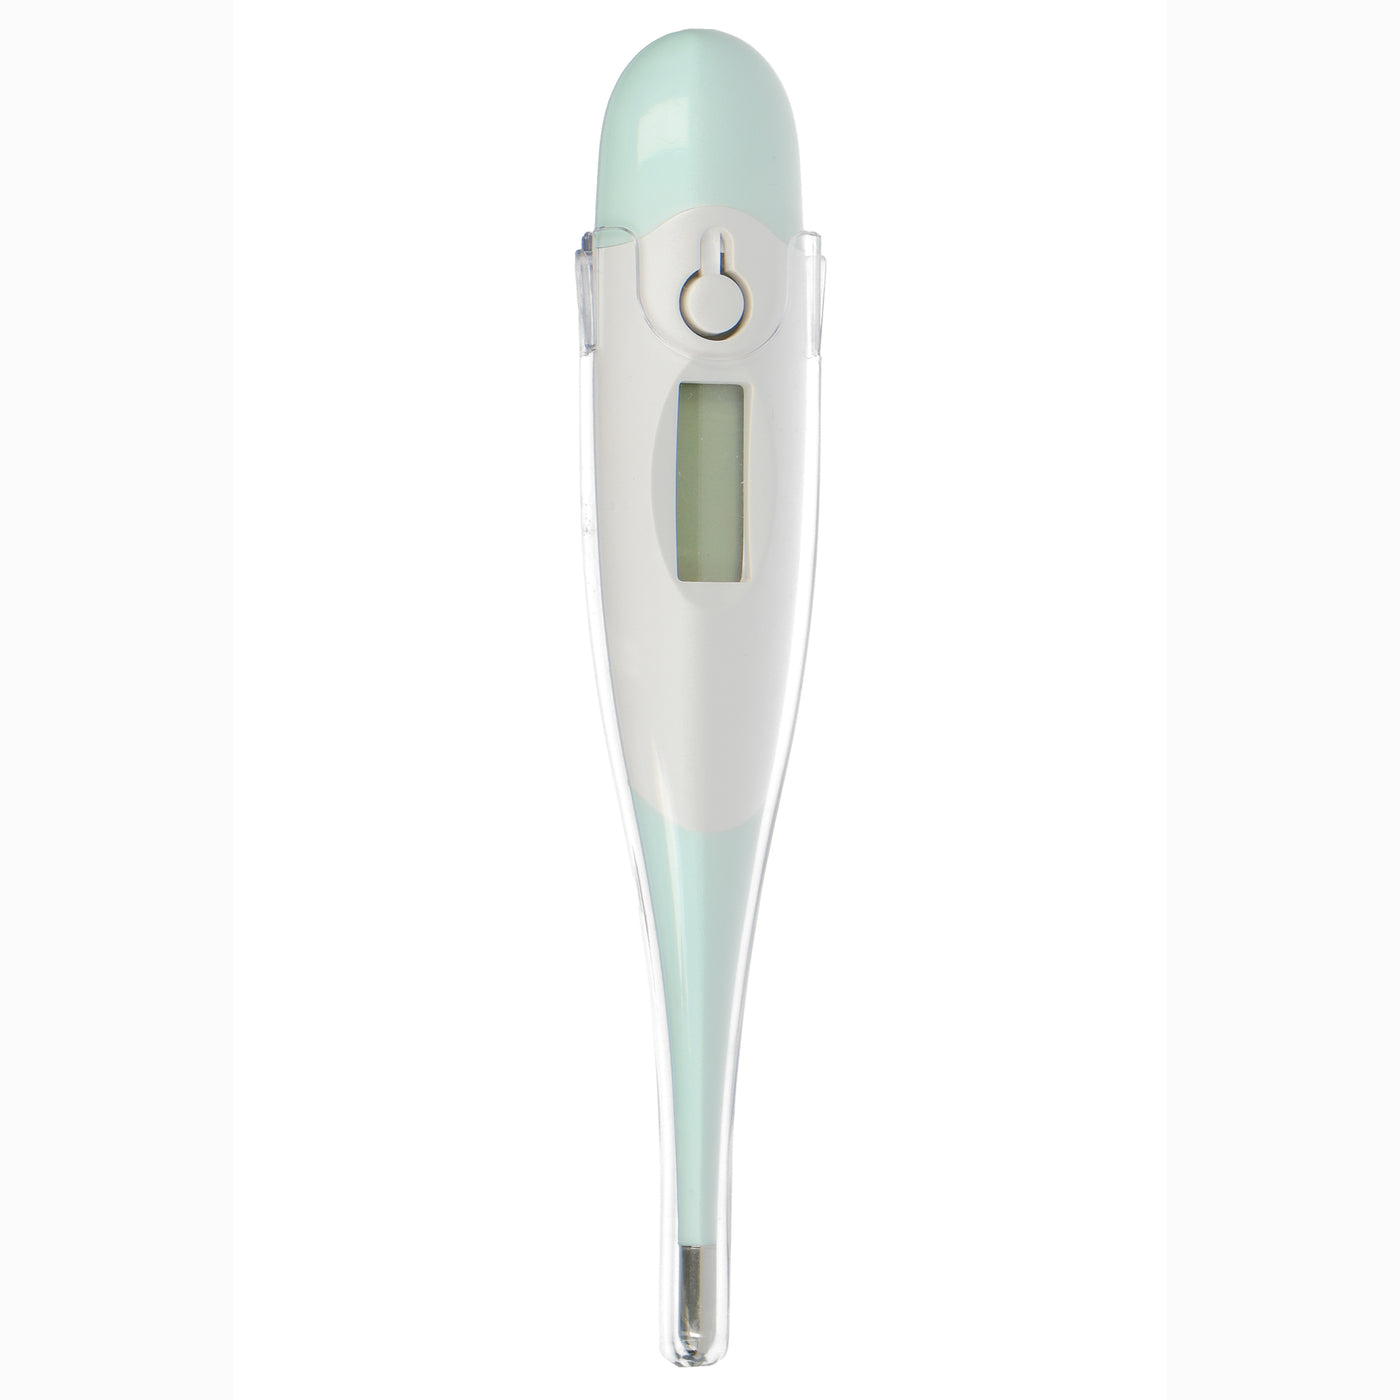 Alecto BC-19GN - Digitale thermometer, groen